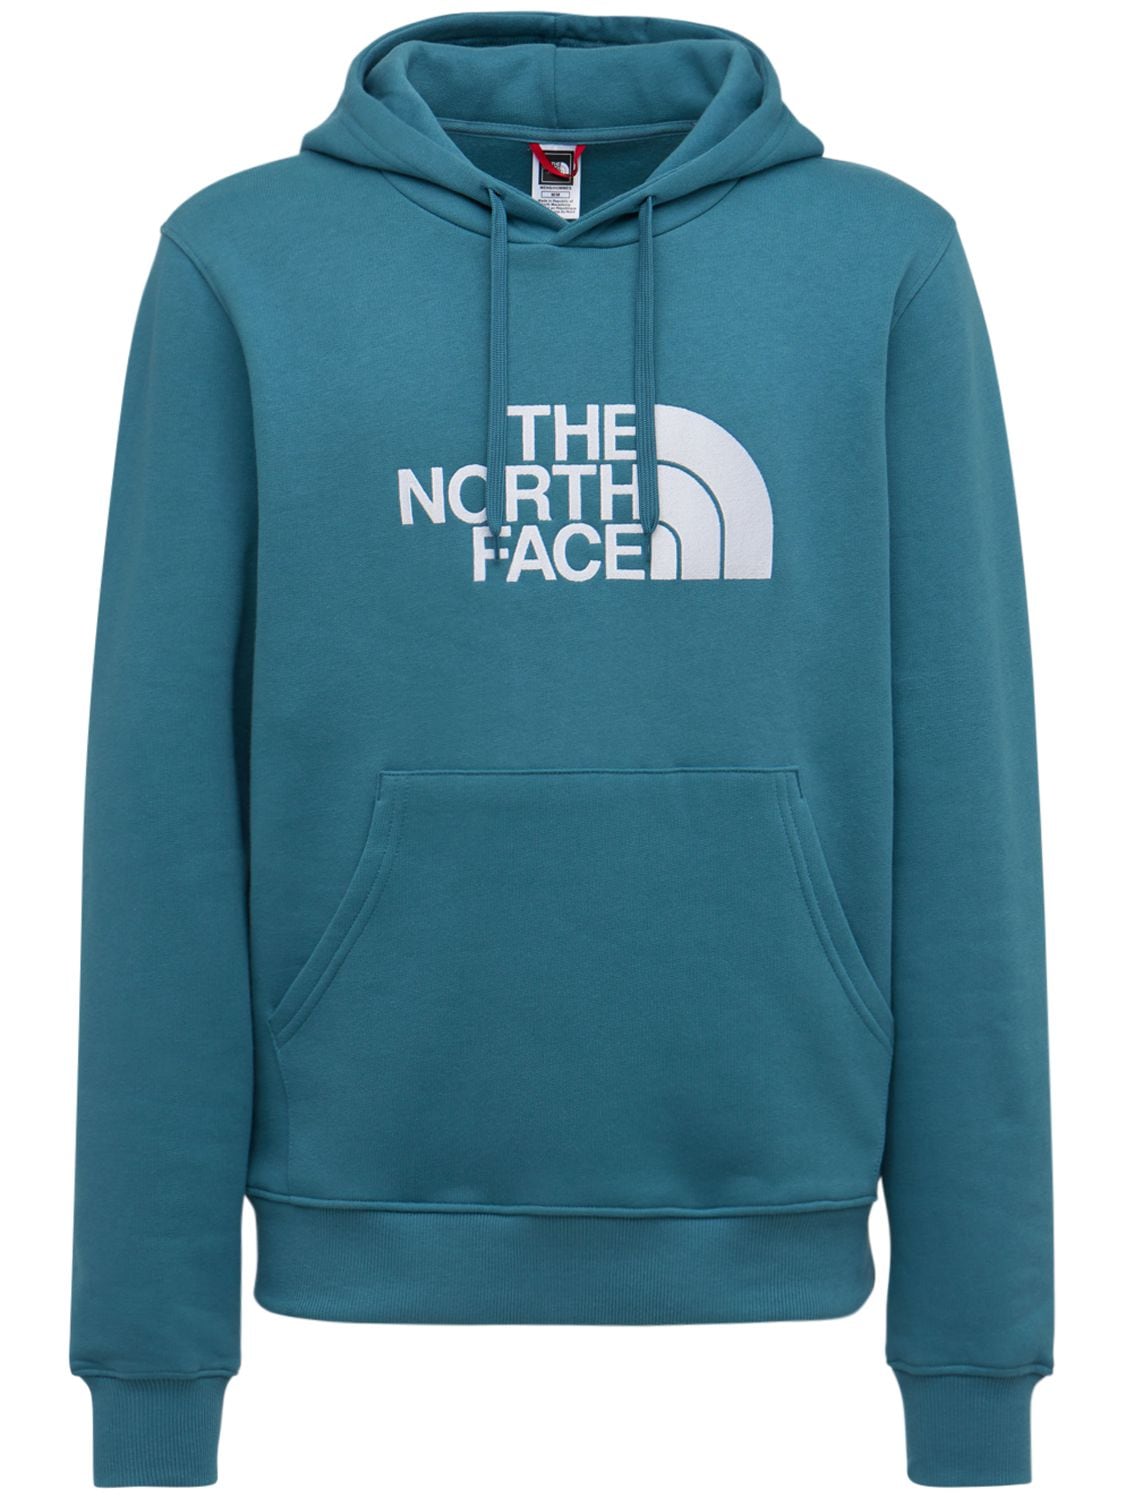 The North Face Logo Cotton Sweatshirt Hoodie In Storm Blue